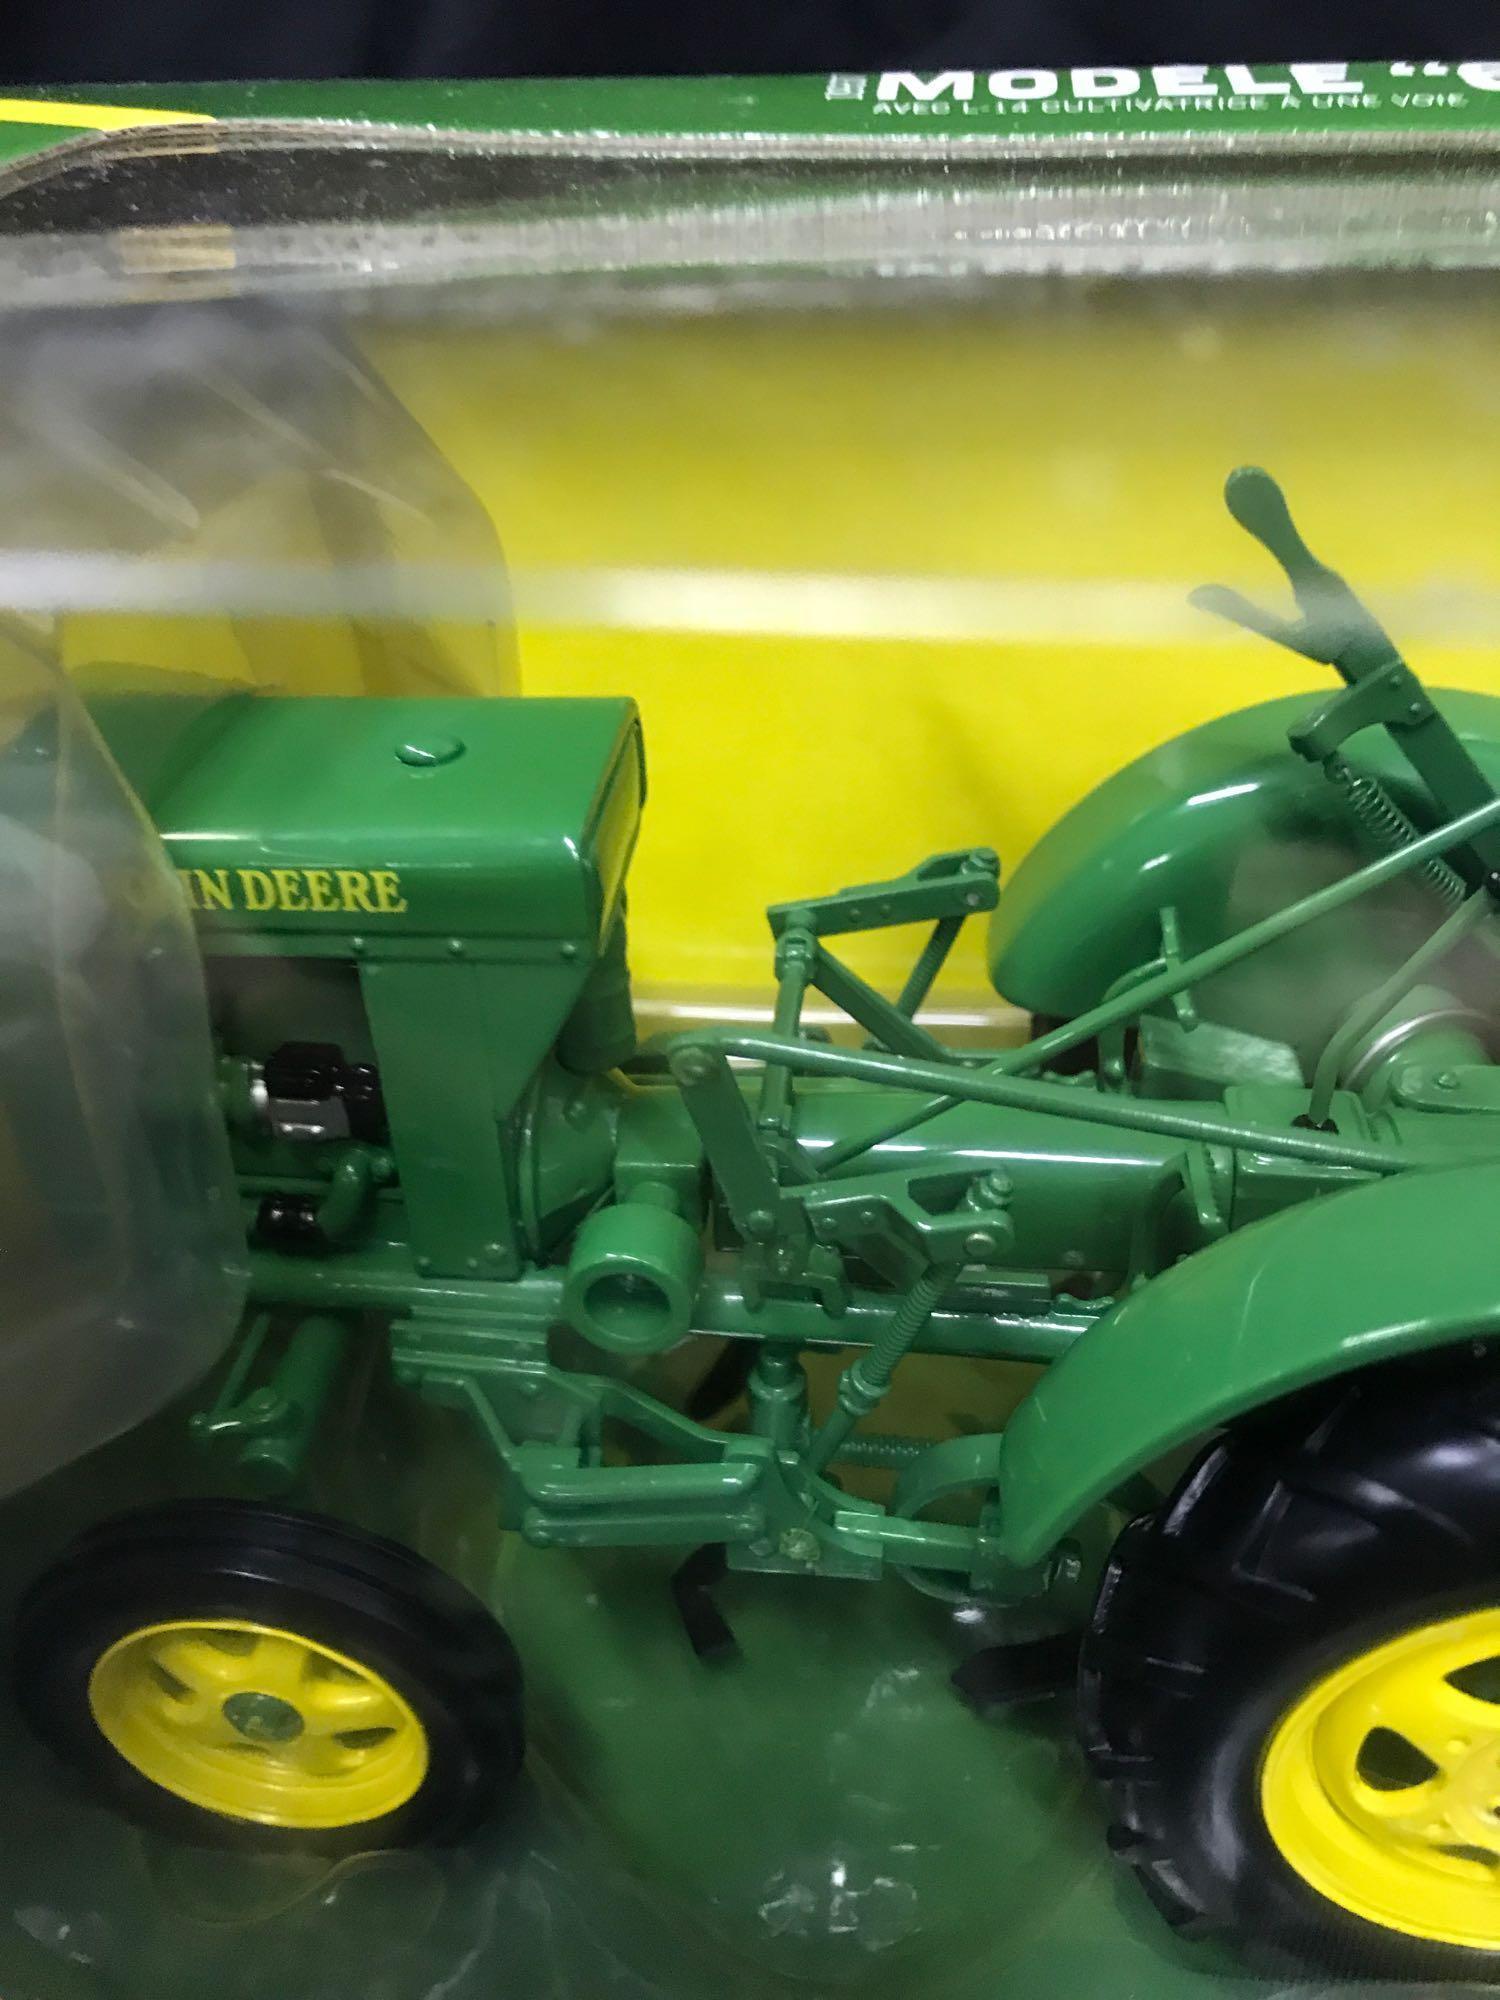 John Deere Model "62" Tractor with "L-14" Cultivator